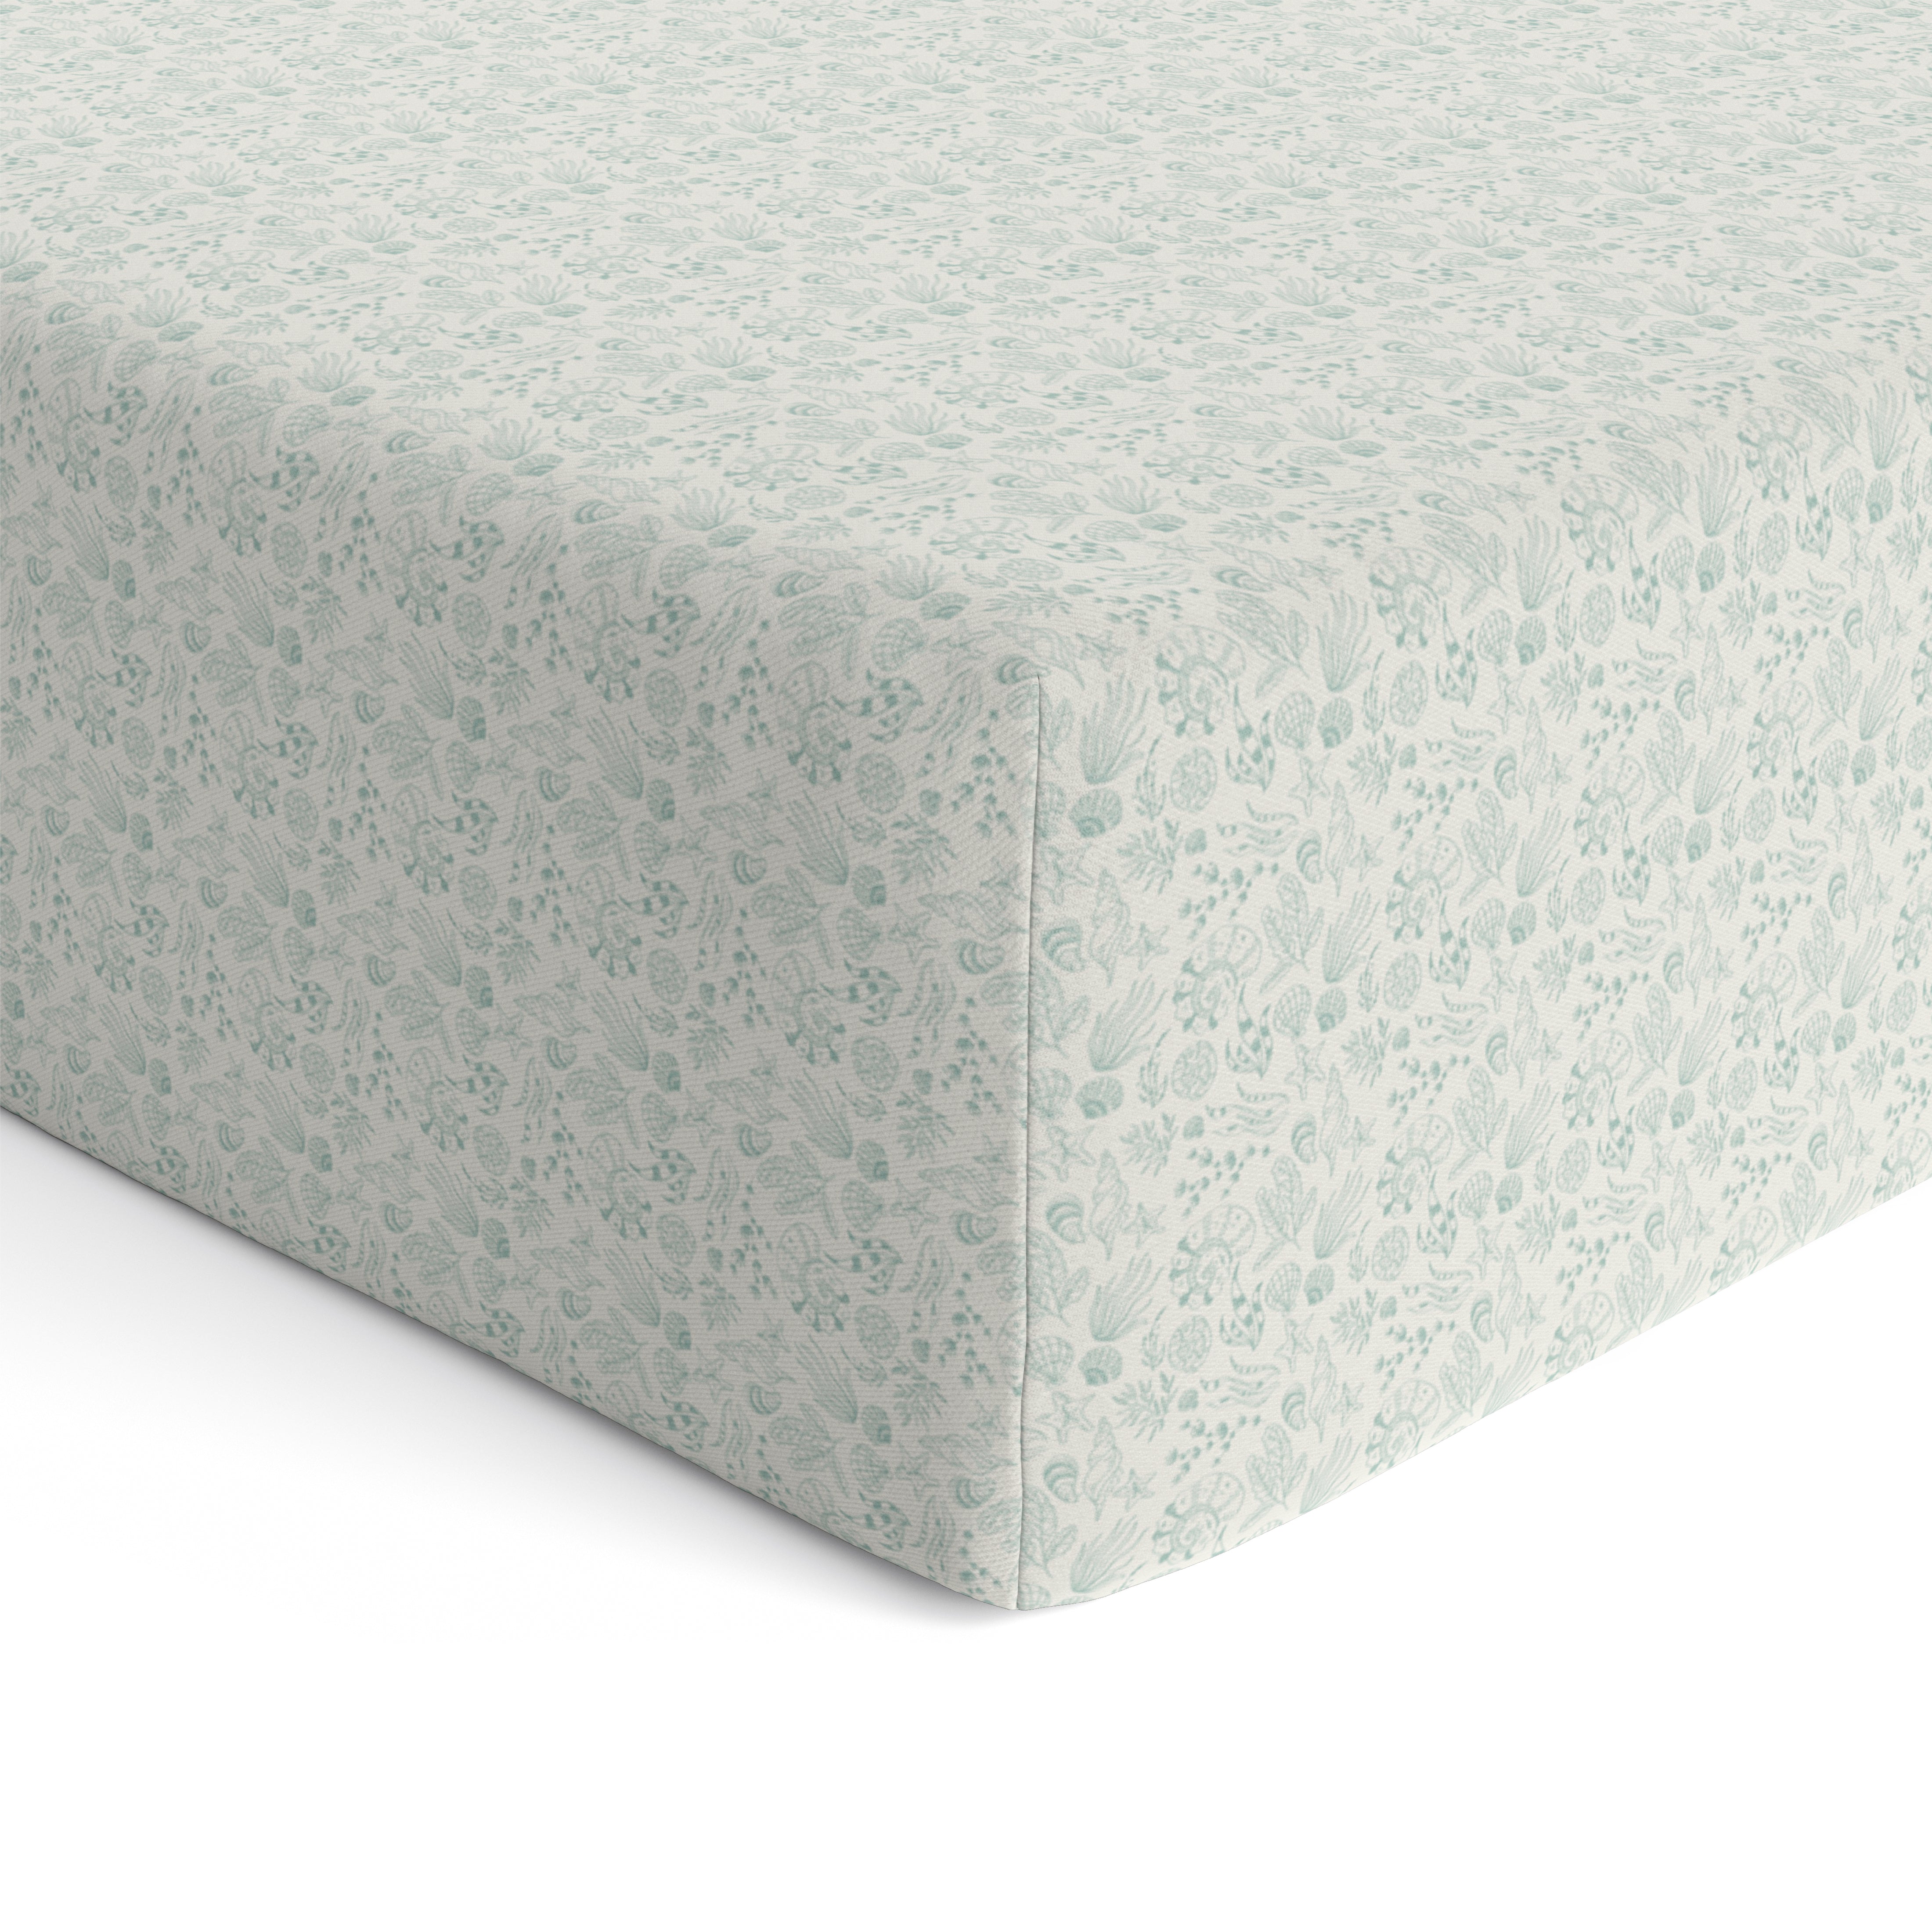 Baby Cot Fitted Sheets / 140 x 80 / Mint Shell